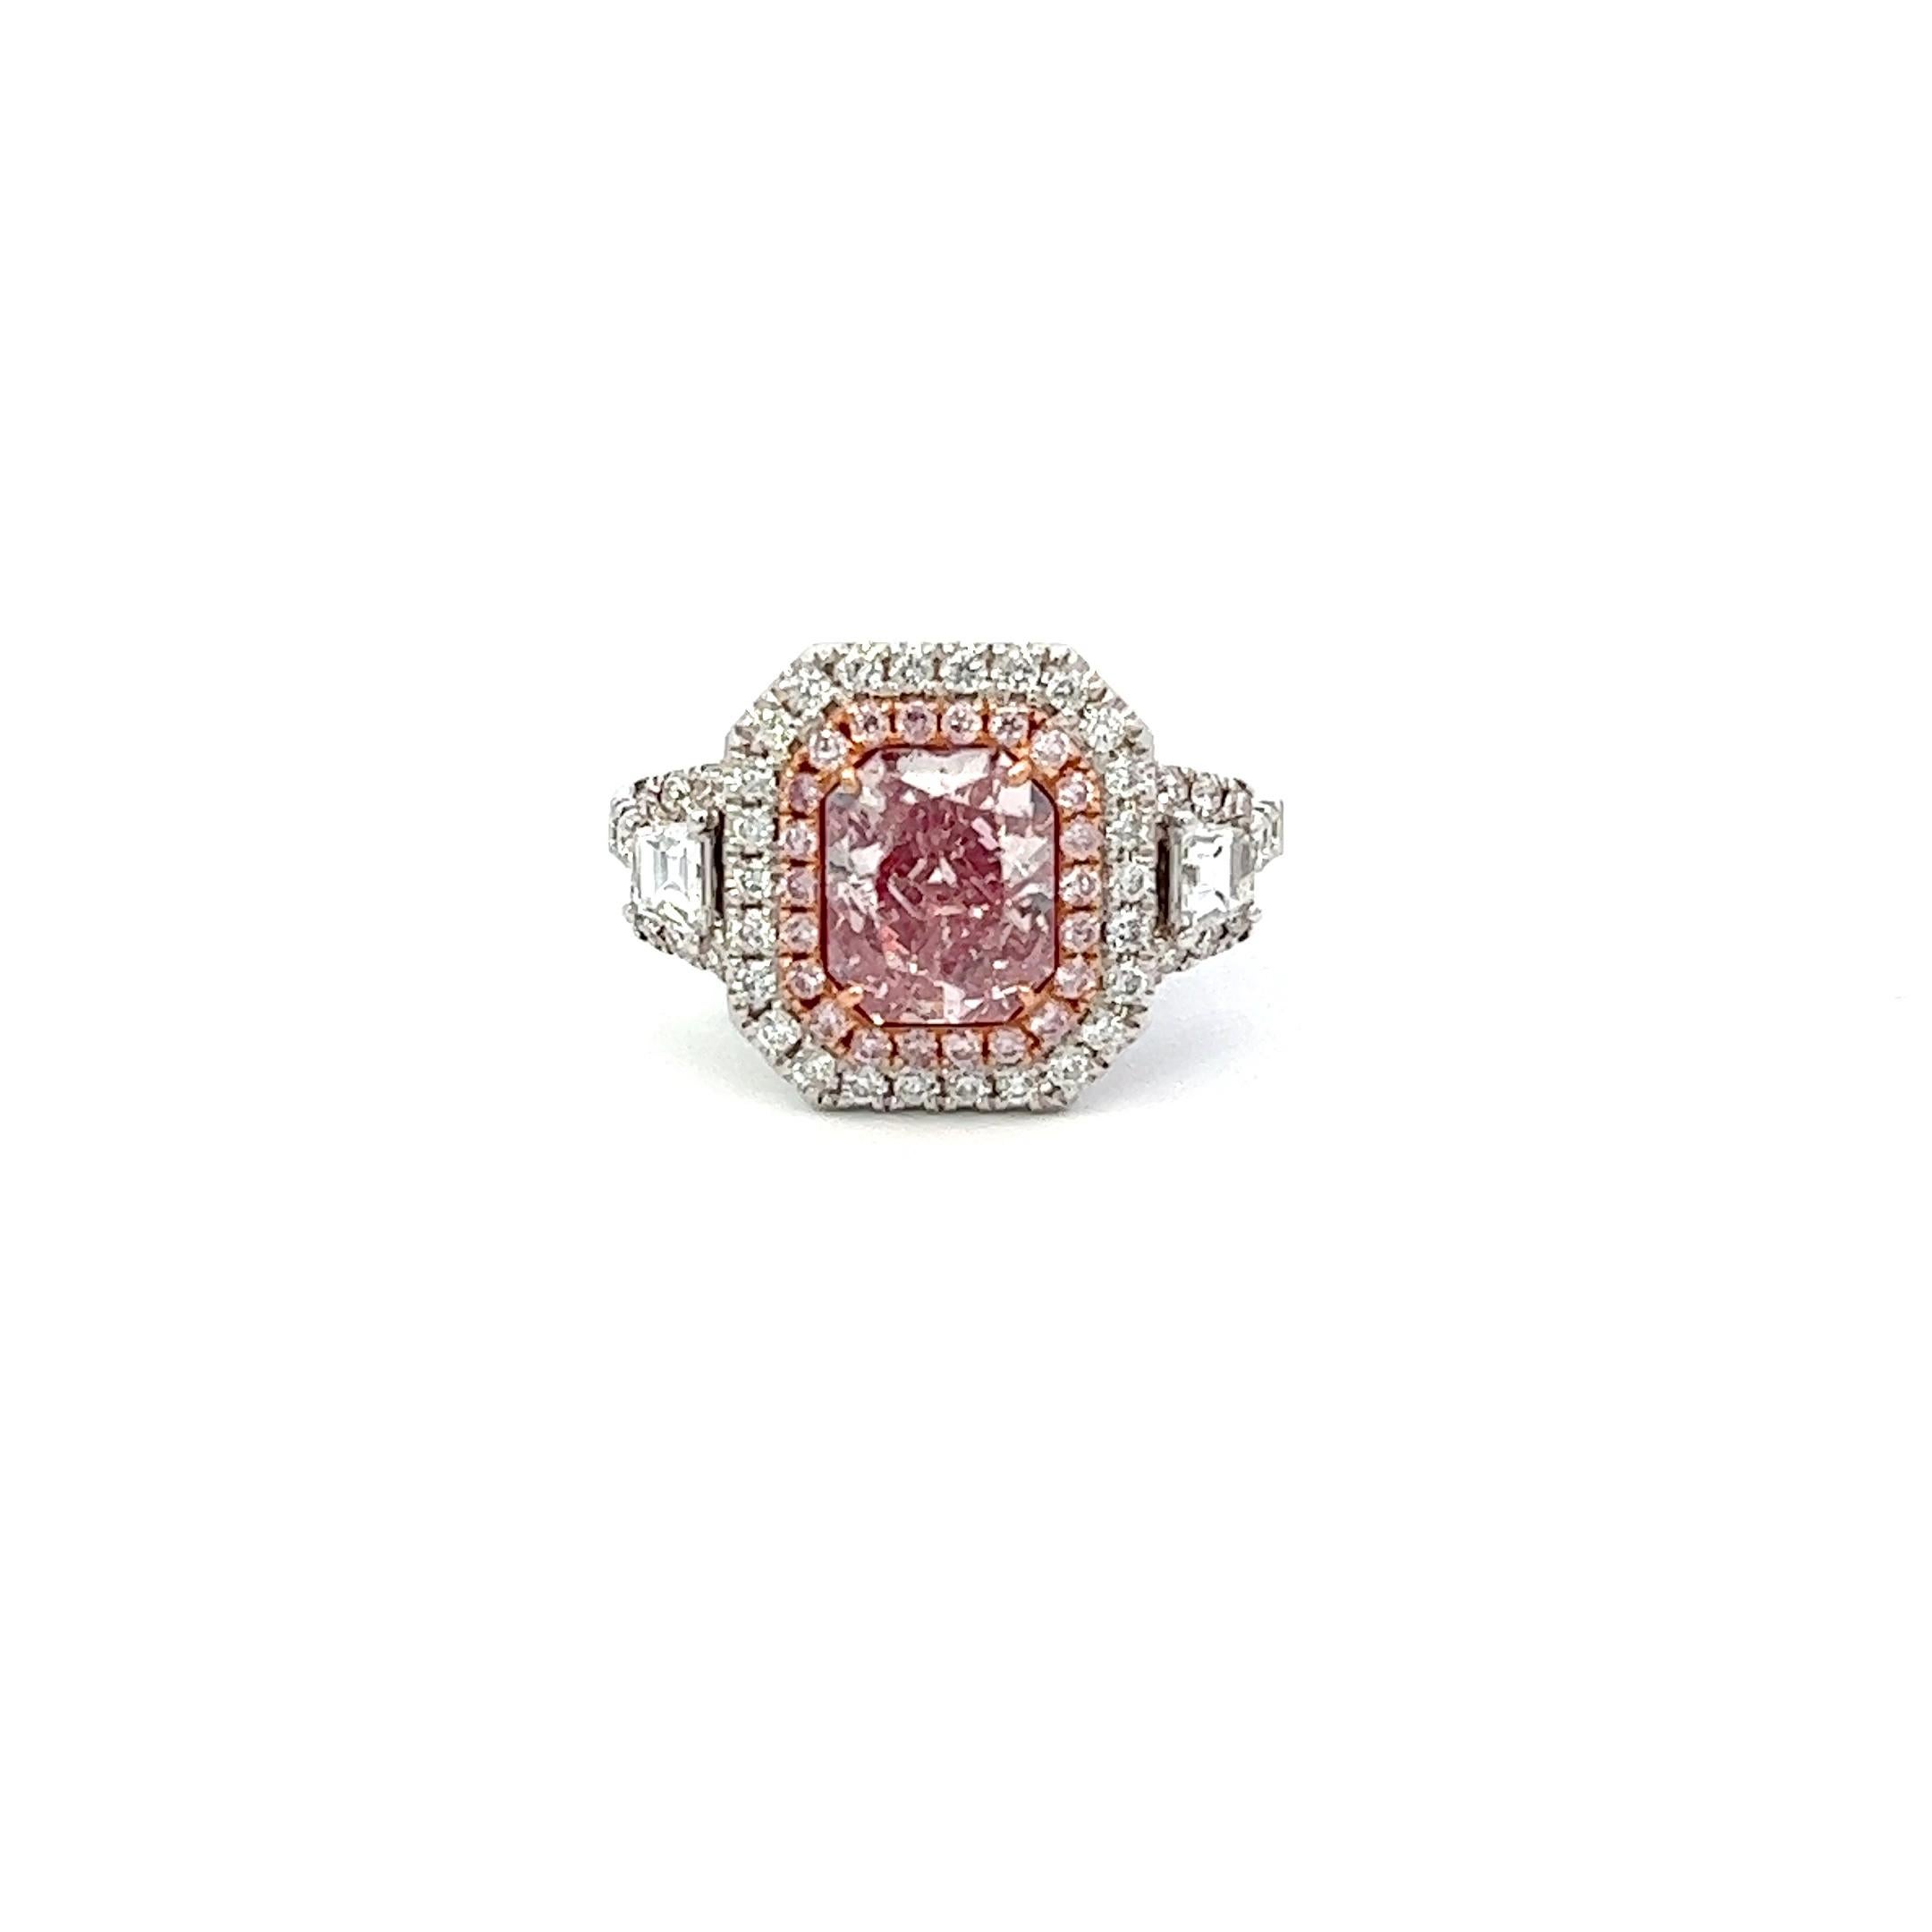 Center: 1.90ct Fancy Purplish Pink Radiant I1 GIA #2191256003
Setting: 18k White Gold 0.84ctw Pink and White Diamonds

An extremely rare and stunning natural pink diamond center. Pink Diamonds account for less than 0.01% of all diamonds mined in the